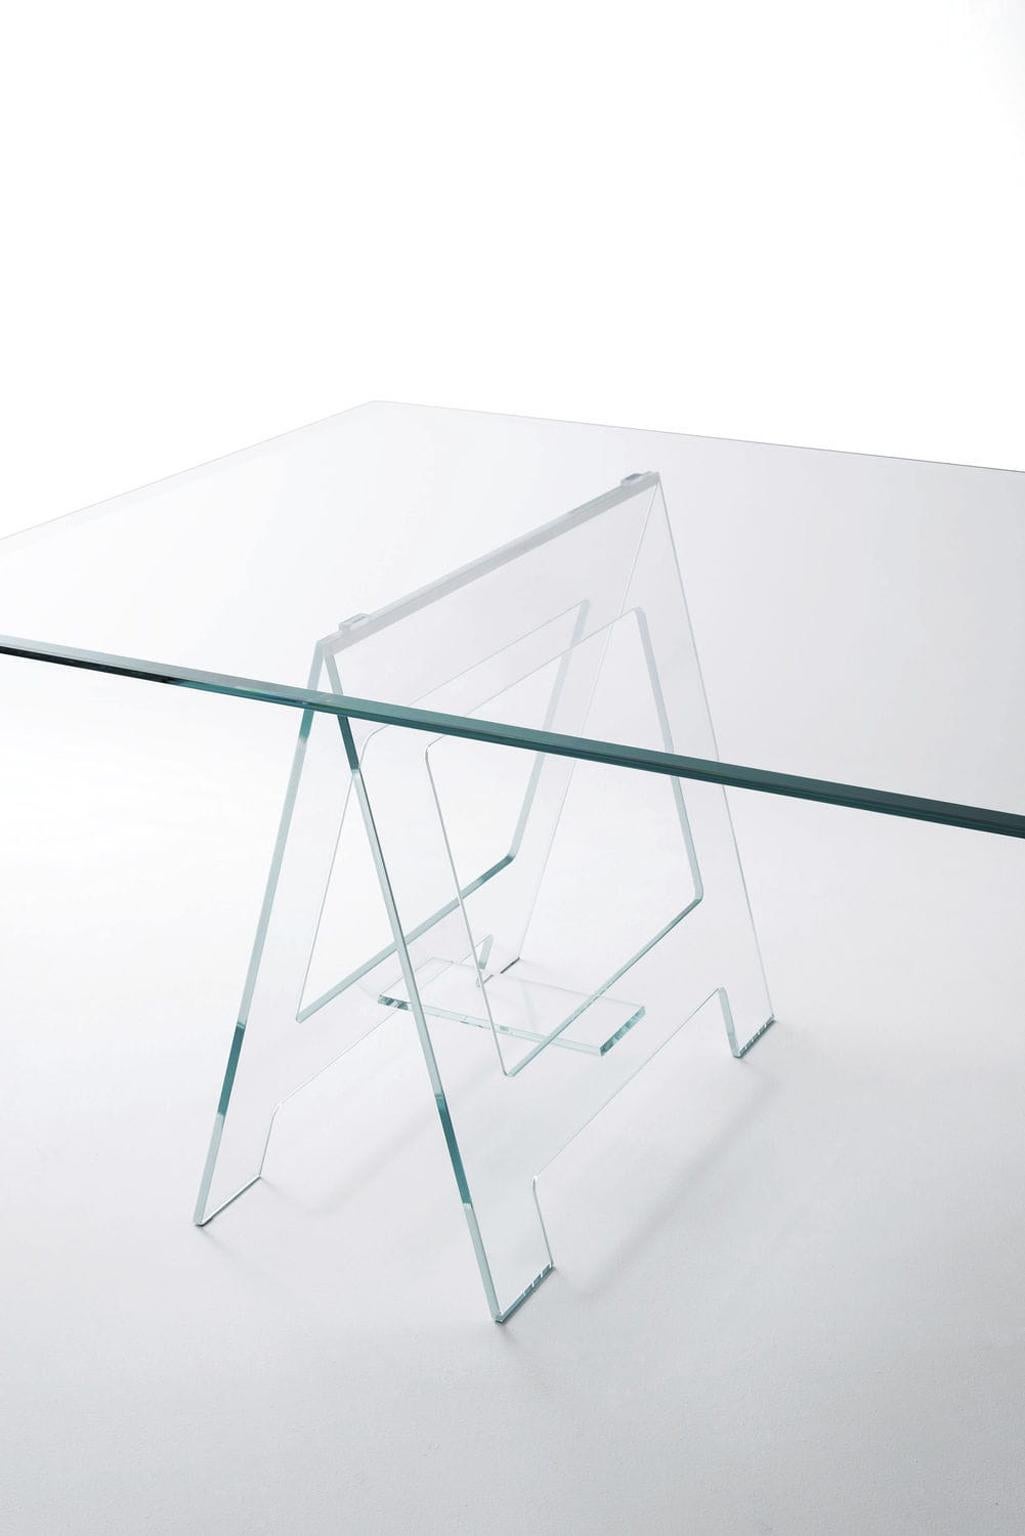 Contemporary 21st Century Italian Modern Design Crystal Desk or Dining Table with Easels For Sale